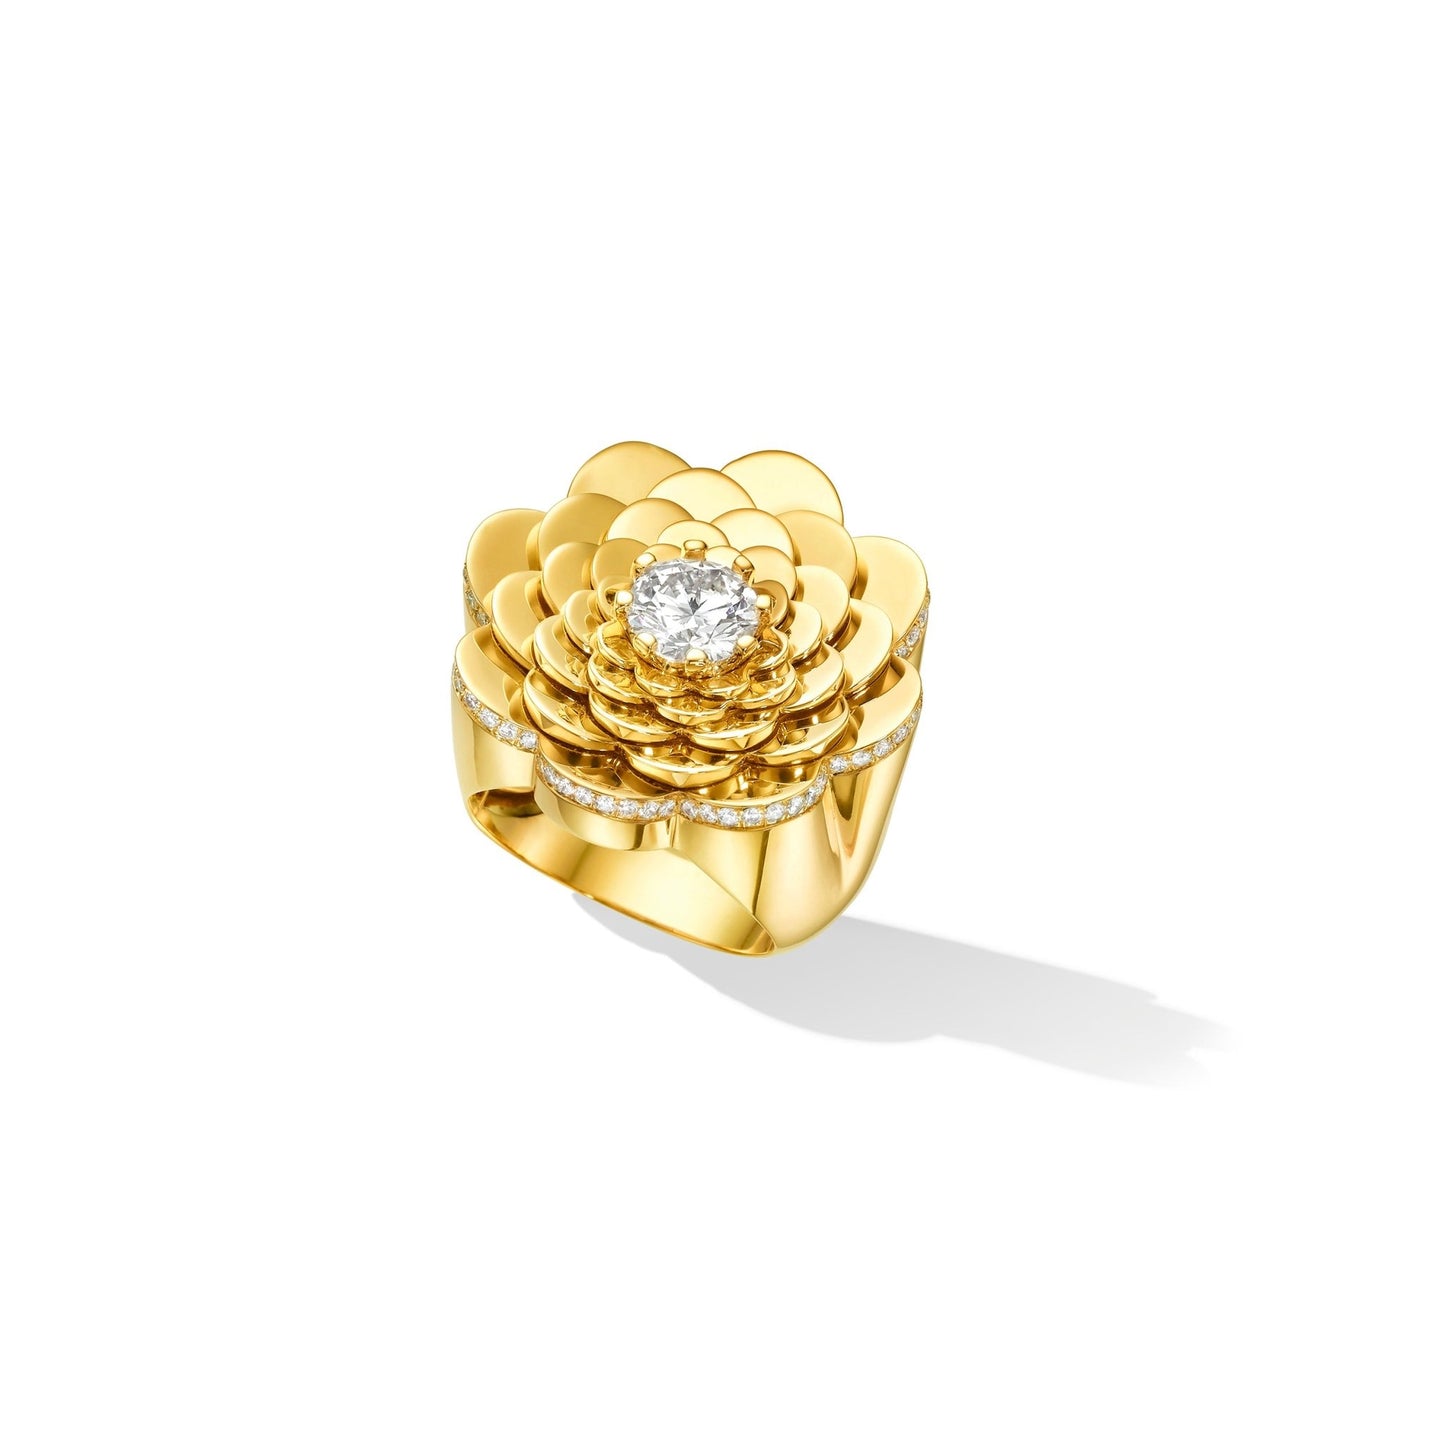 Yellow Gold Trio Cocktail Ring with White Diamonds - Cadar